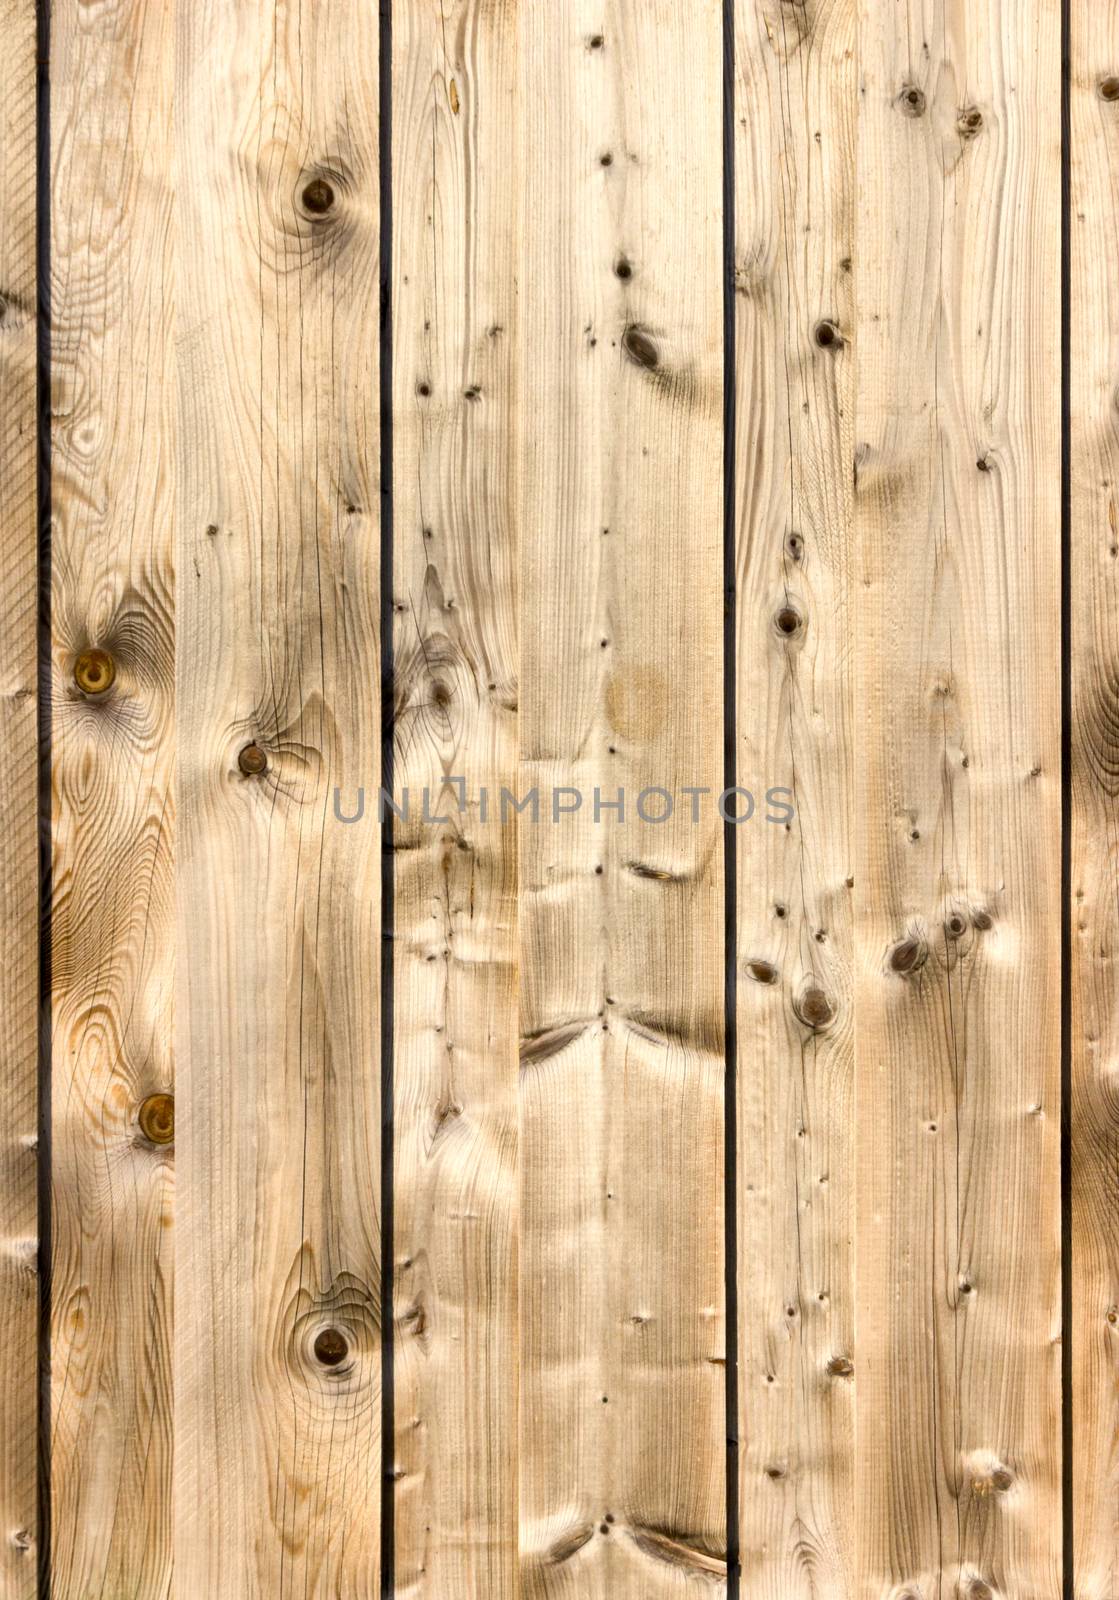 Vertical rustic wooden boards or planks as part of fence